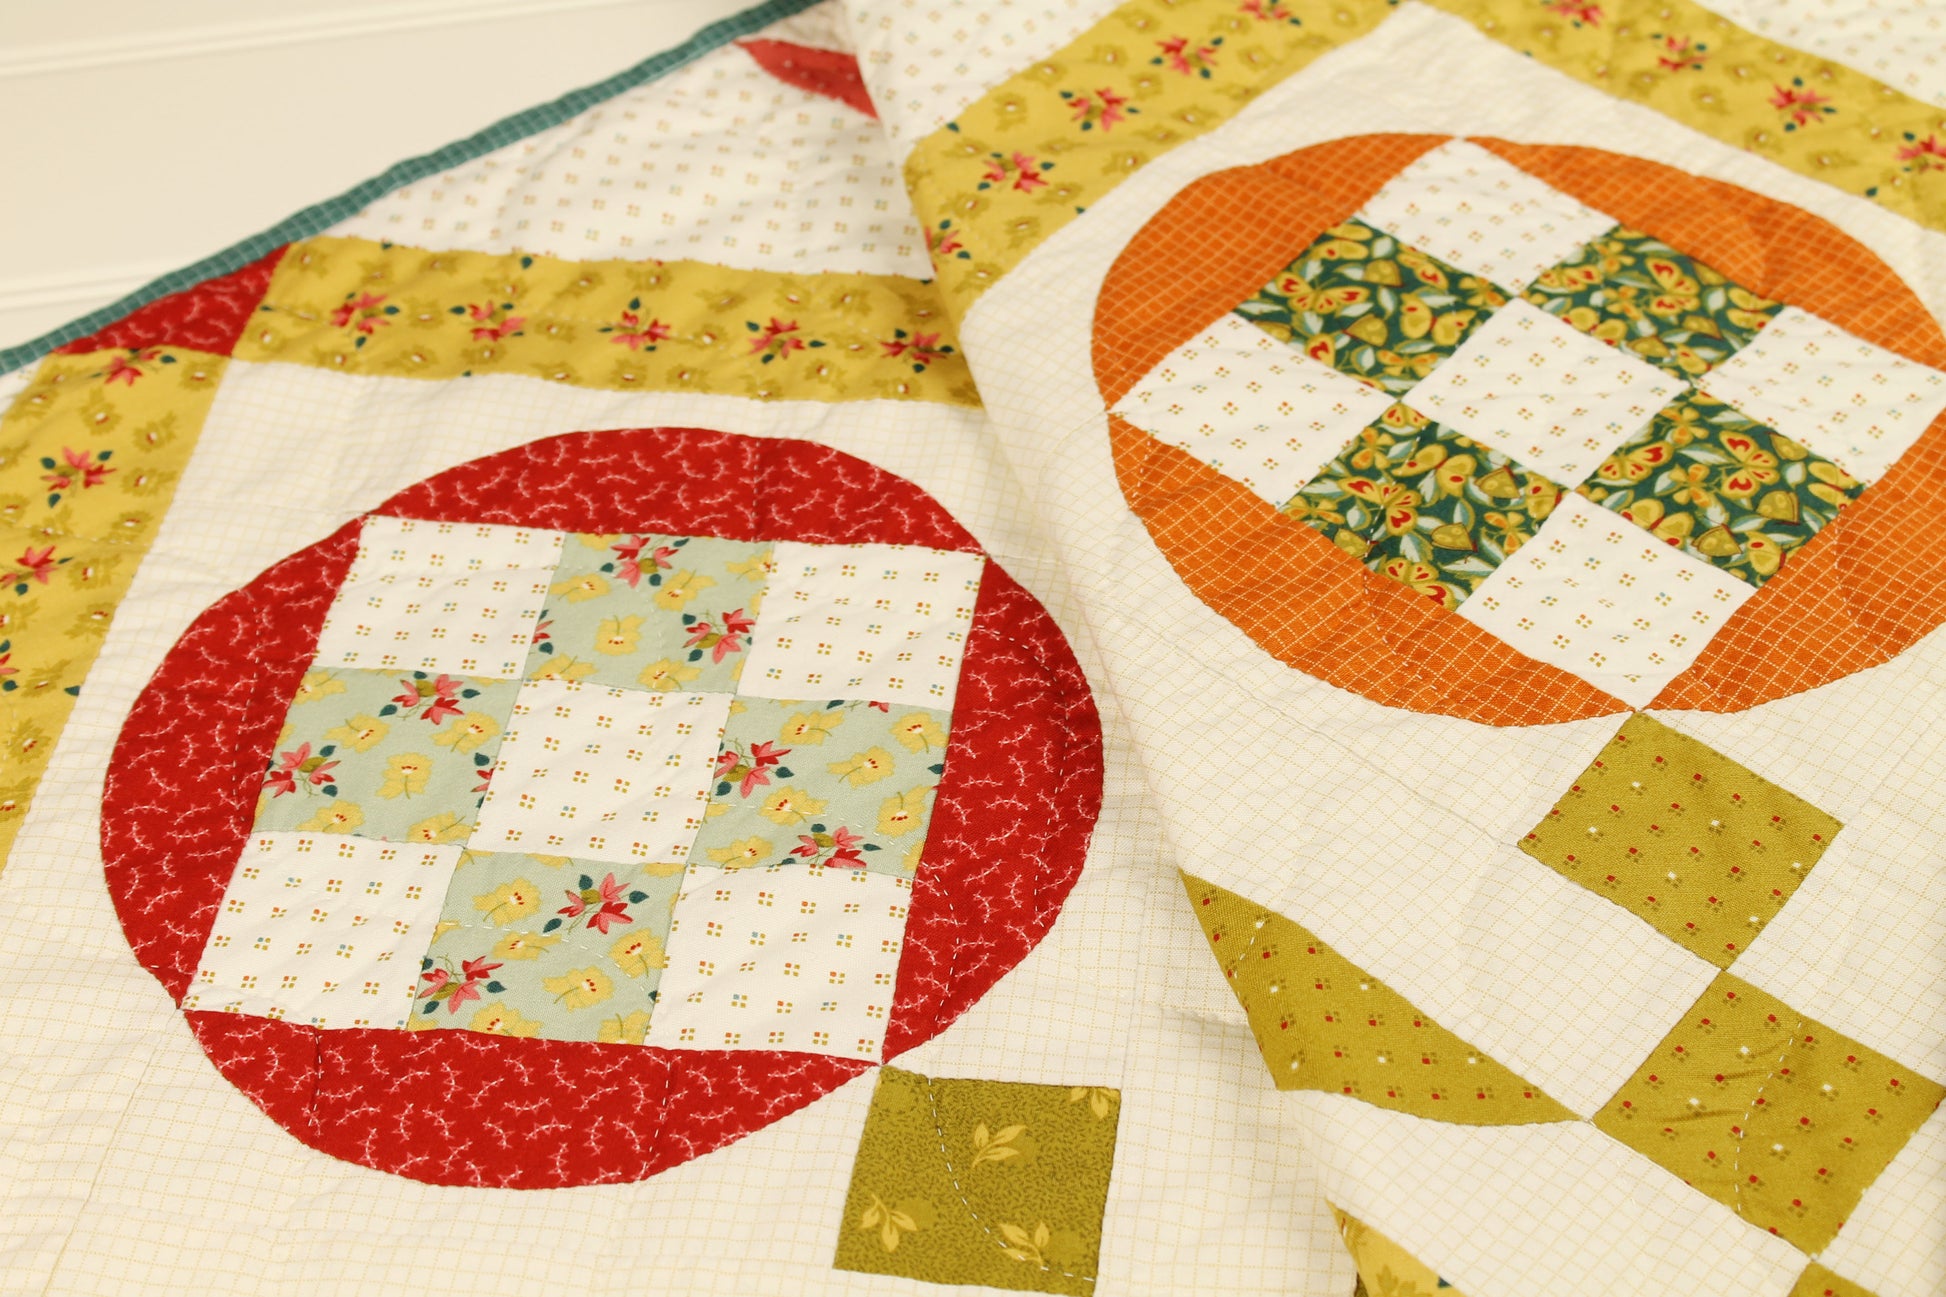 Back & Forth - Square Dance - Cotton - Licence To Quilt